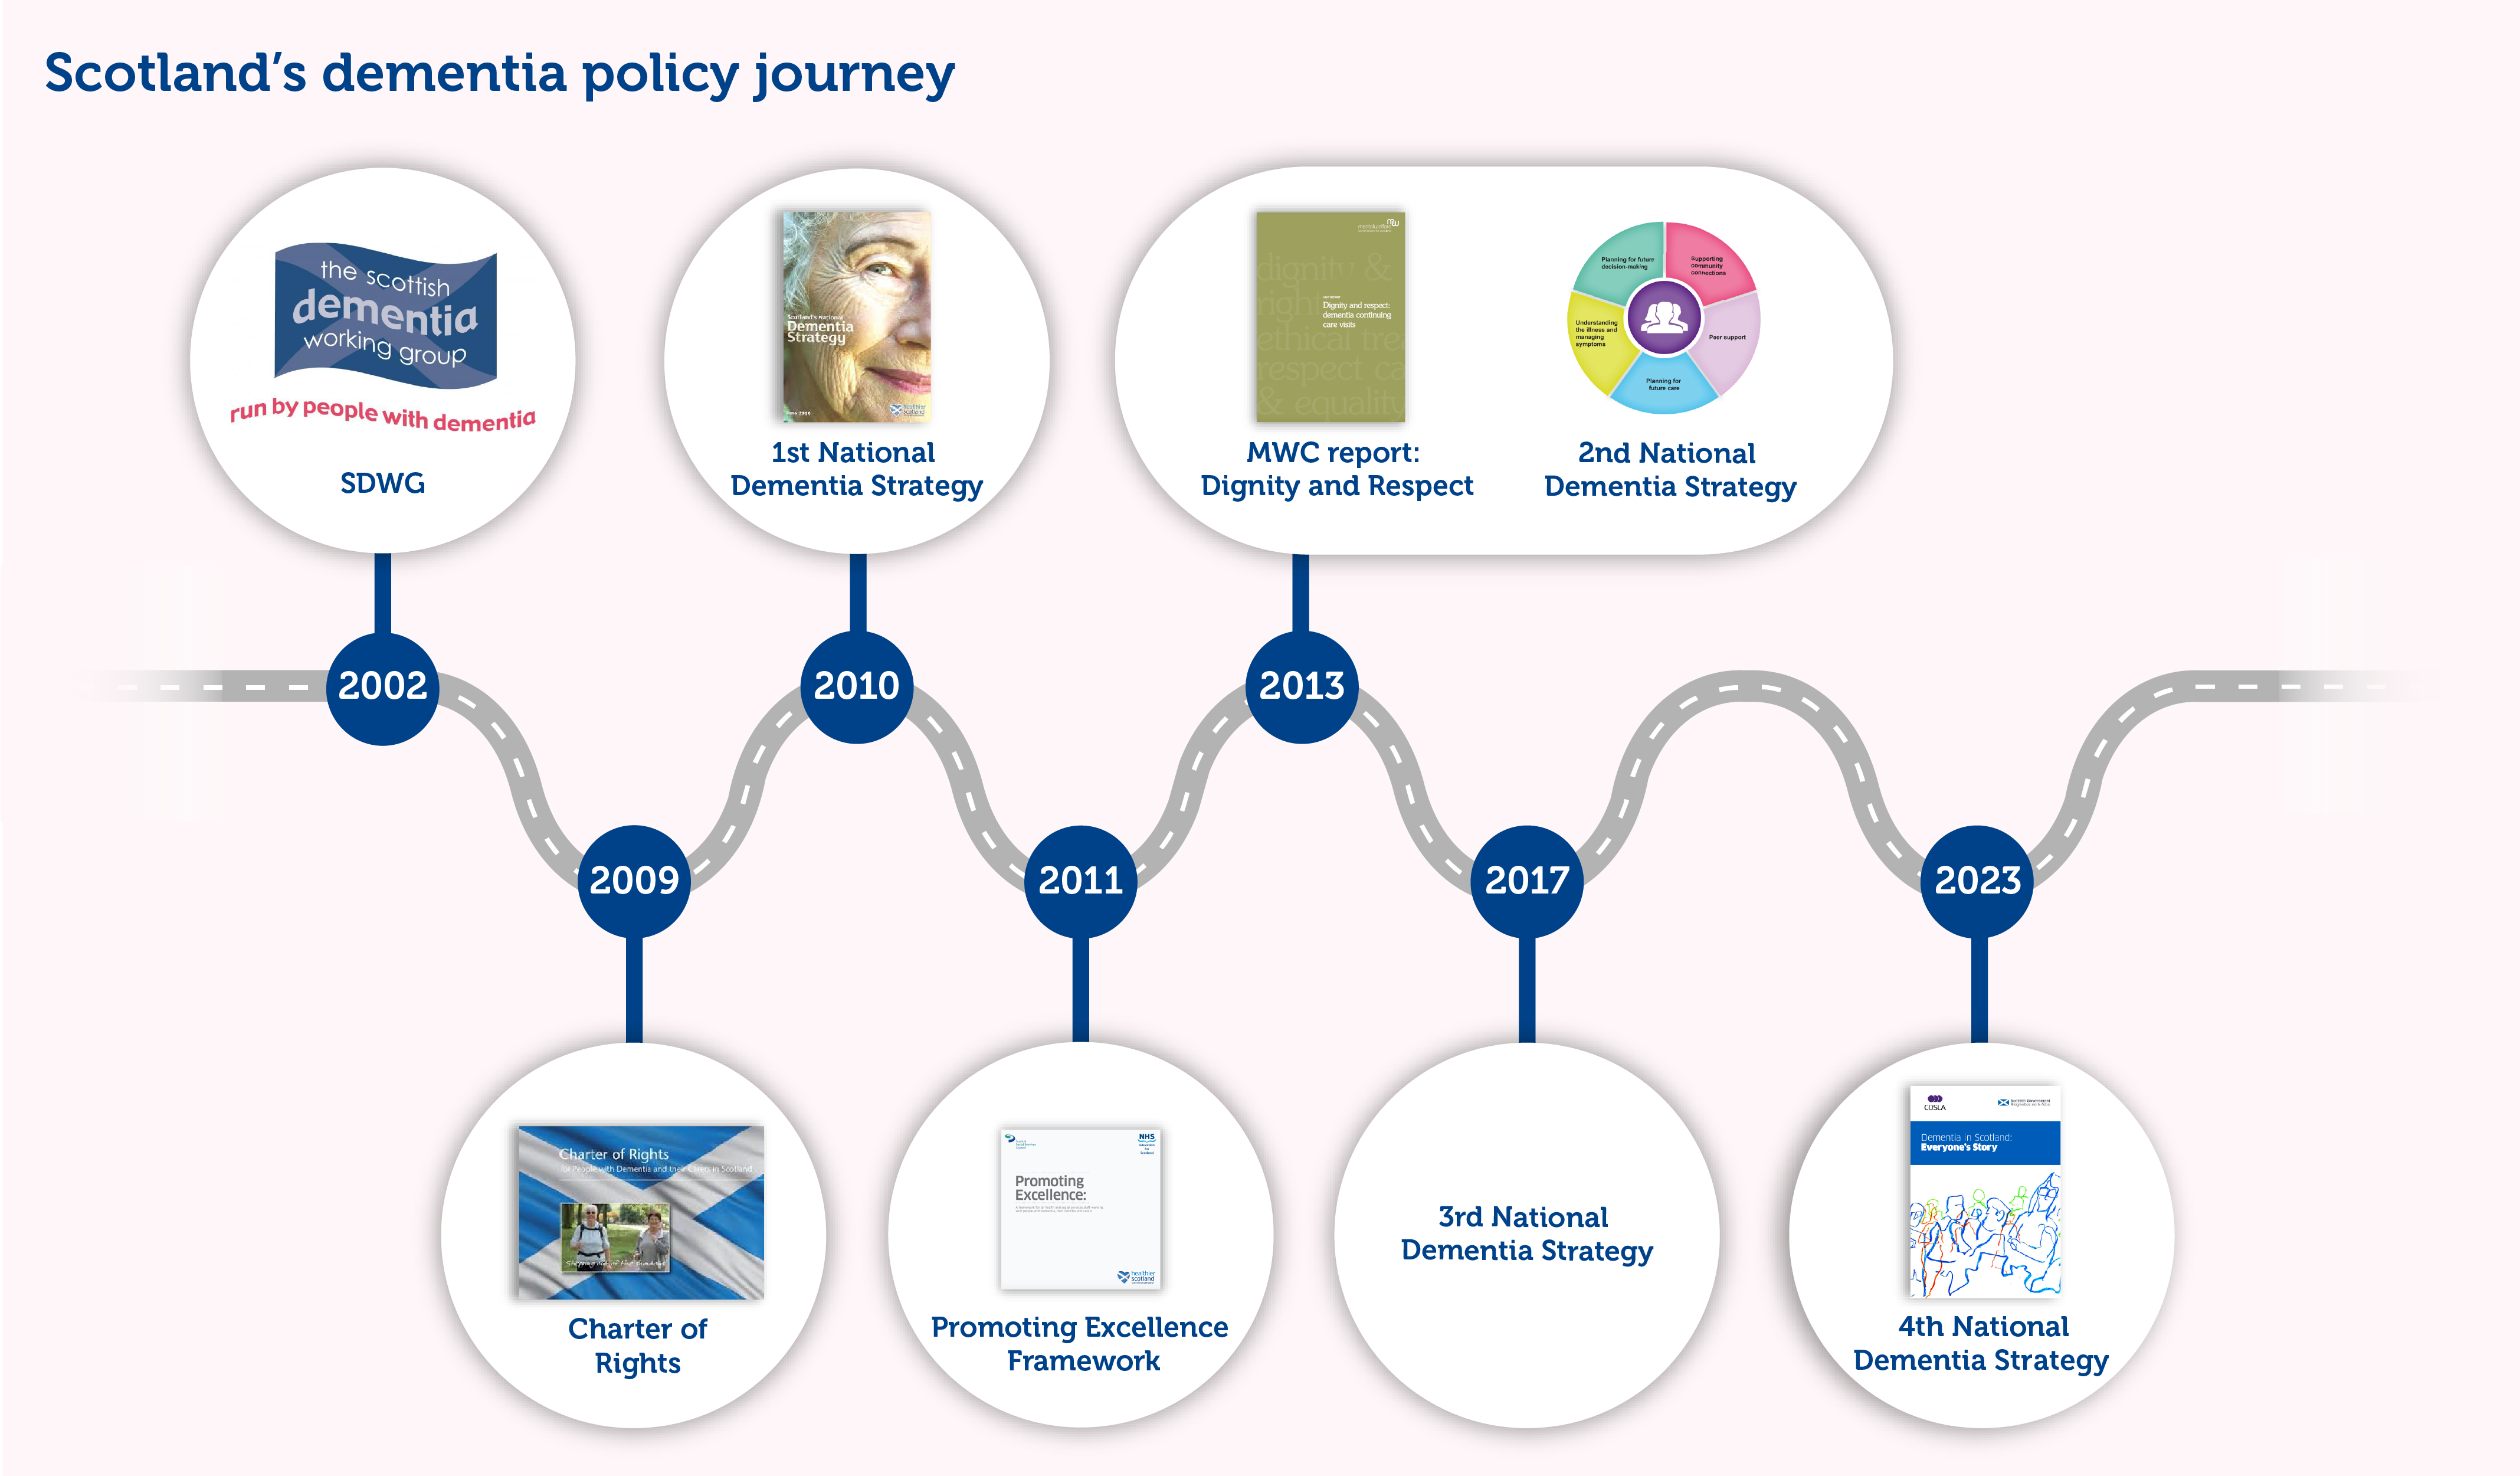 a pictoral chronology of Scotland's dementia policy journey.